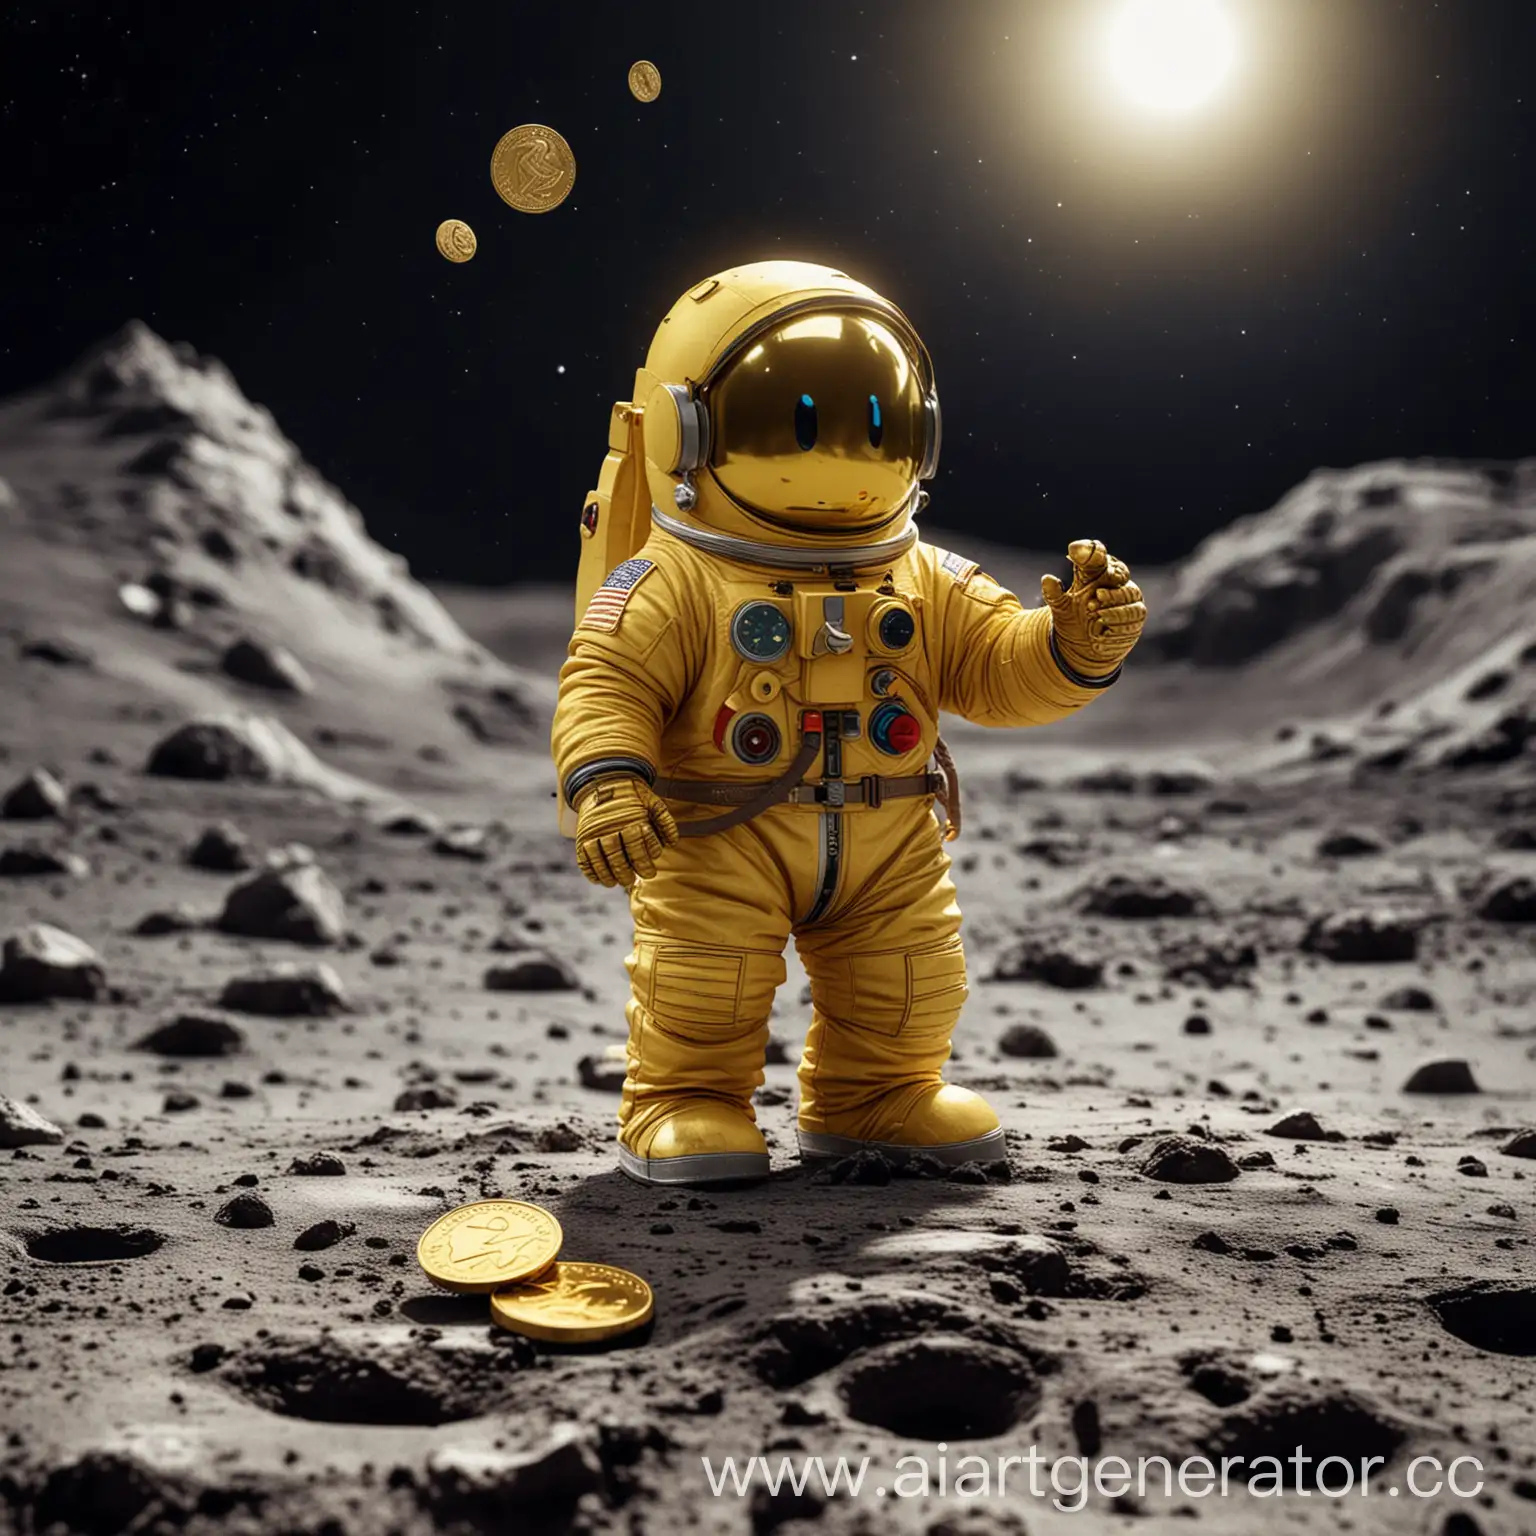 Astronaut-Yellow-Pacman-Holding-a-Golden-Coin-on-the-Moon